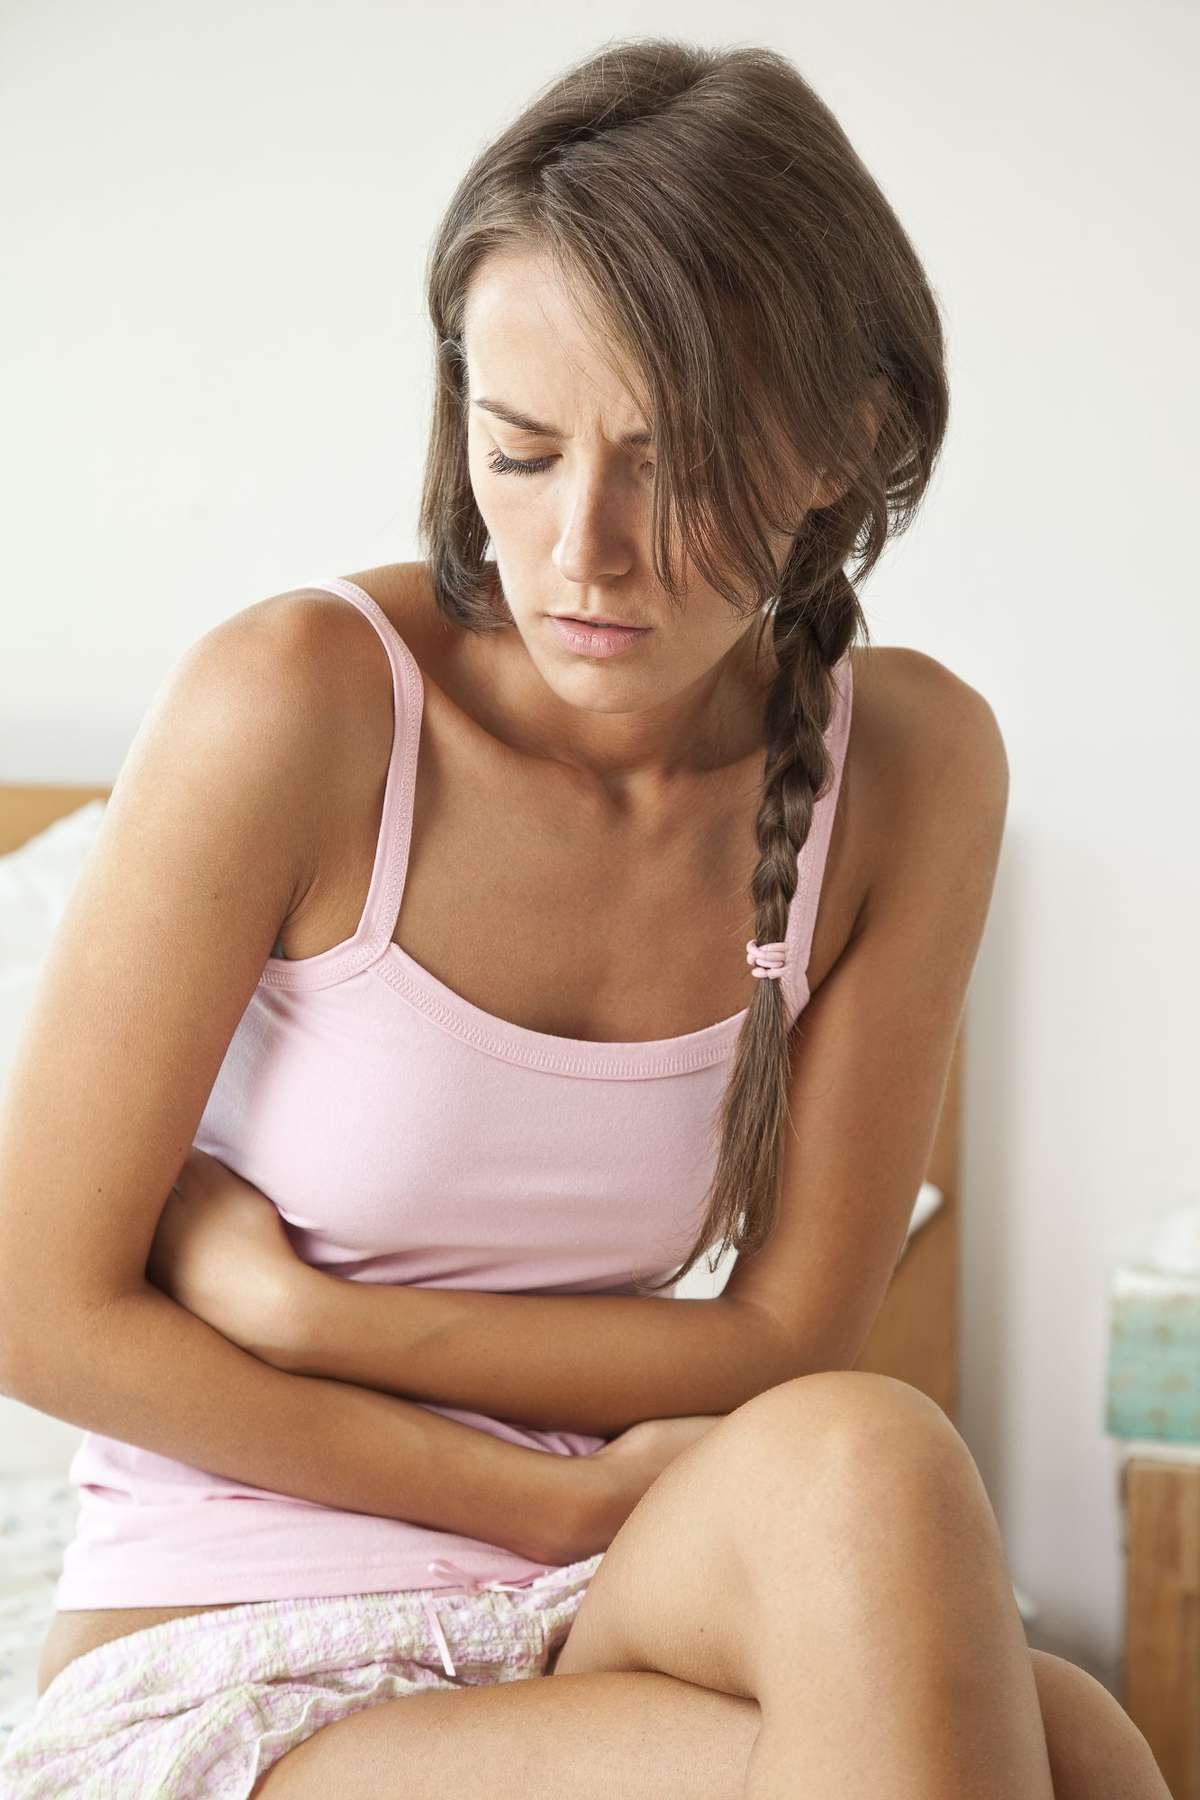 Fibromyalgia Drug Shows Promise in Treating IBS Pain